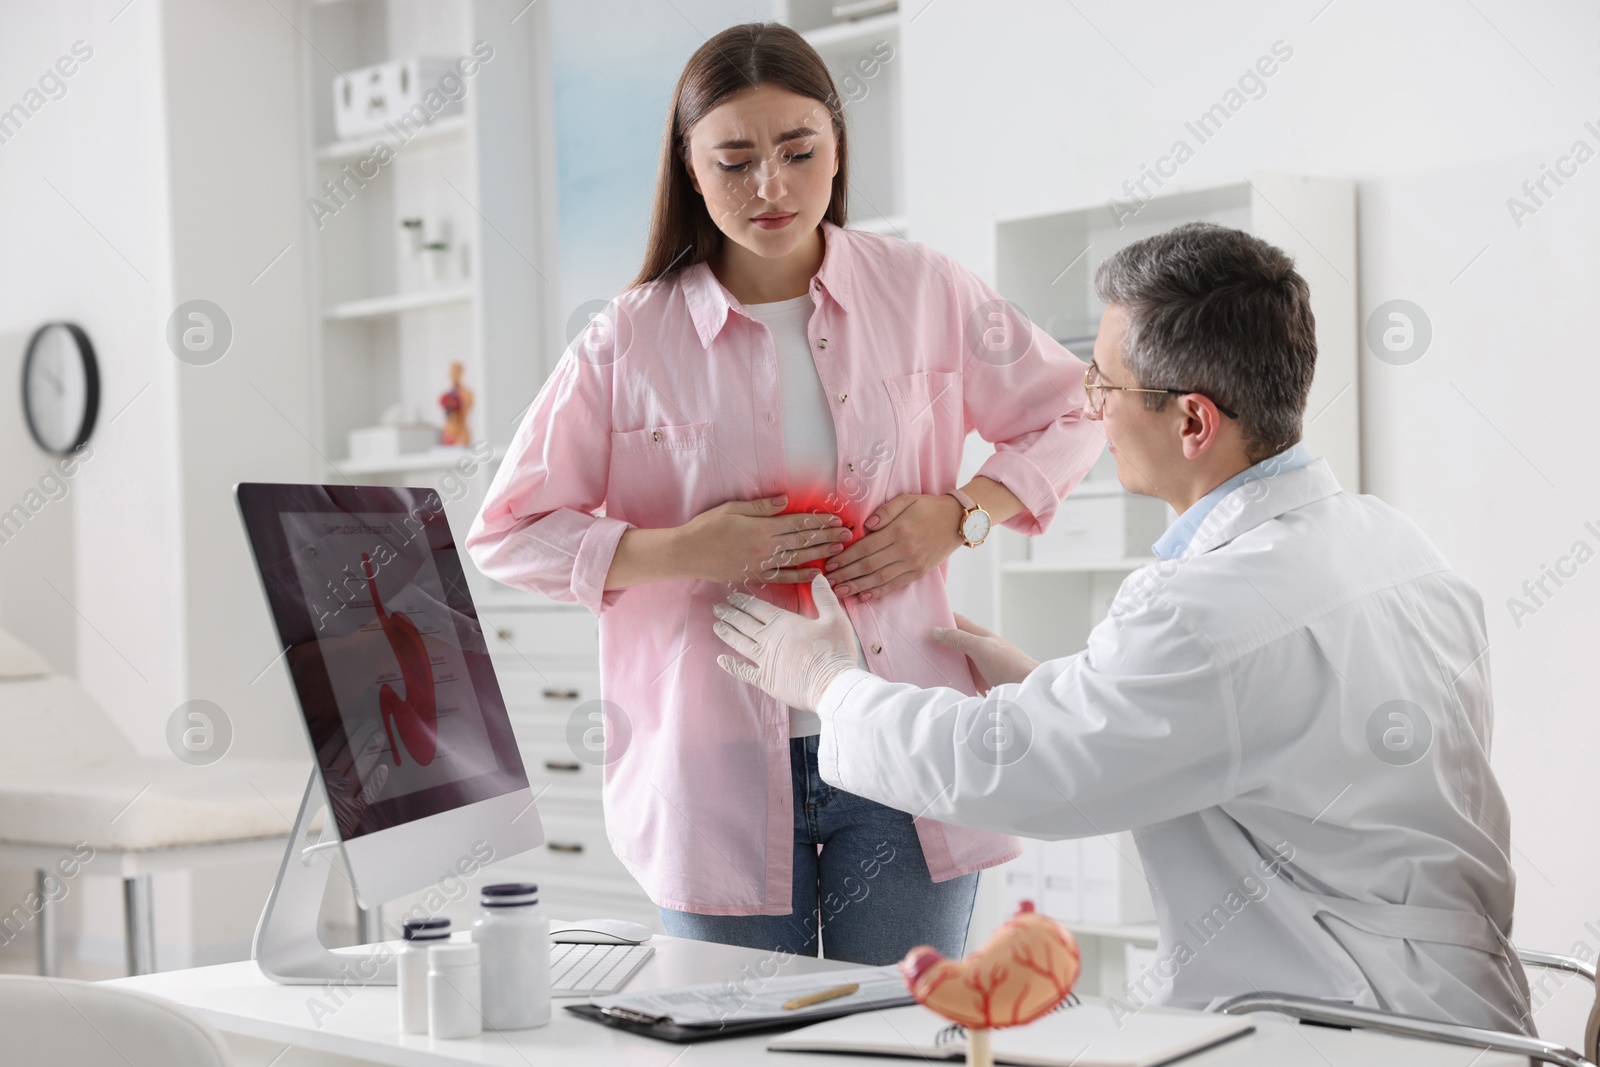 Image of Gastroenterologist examining patient with stomach pain in clinic